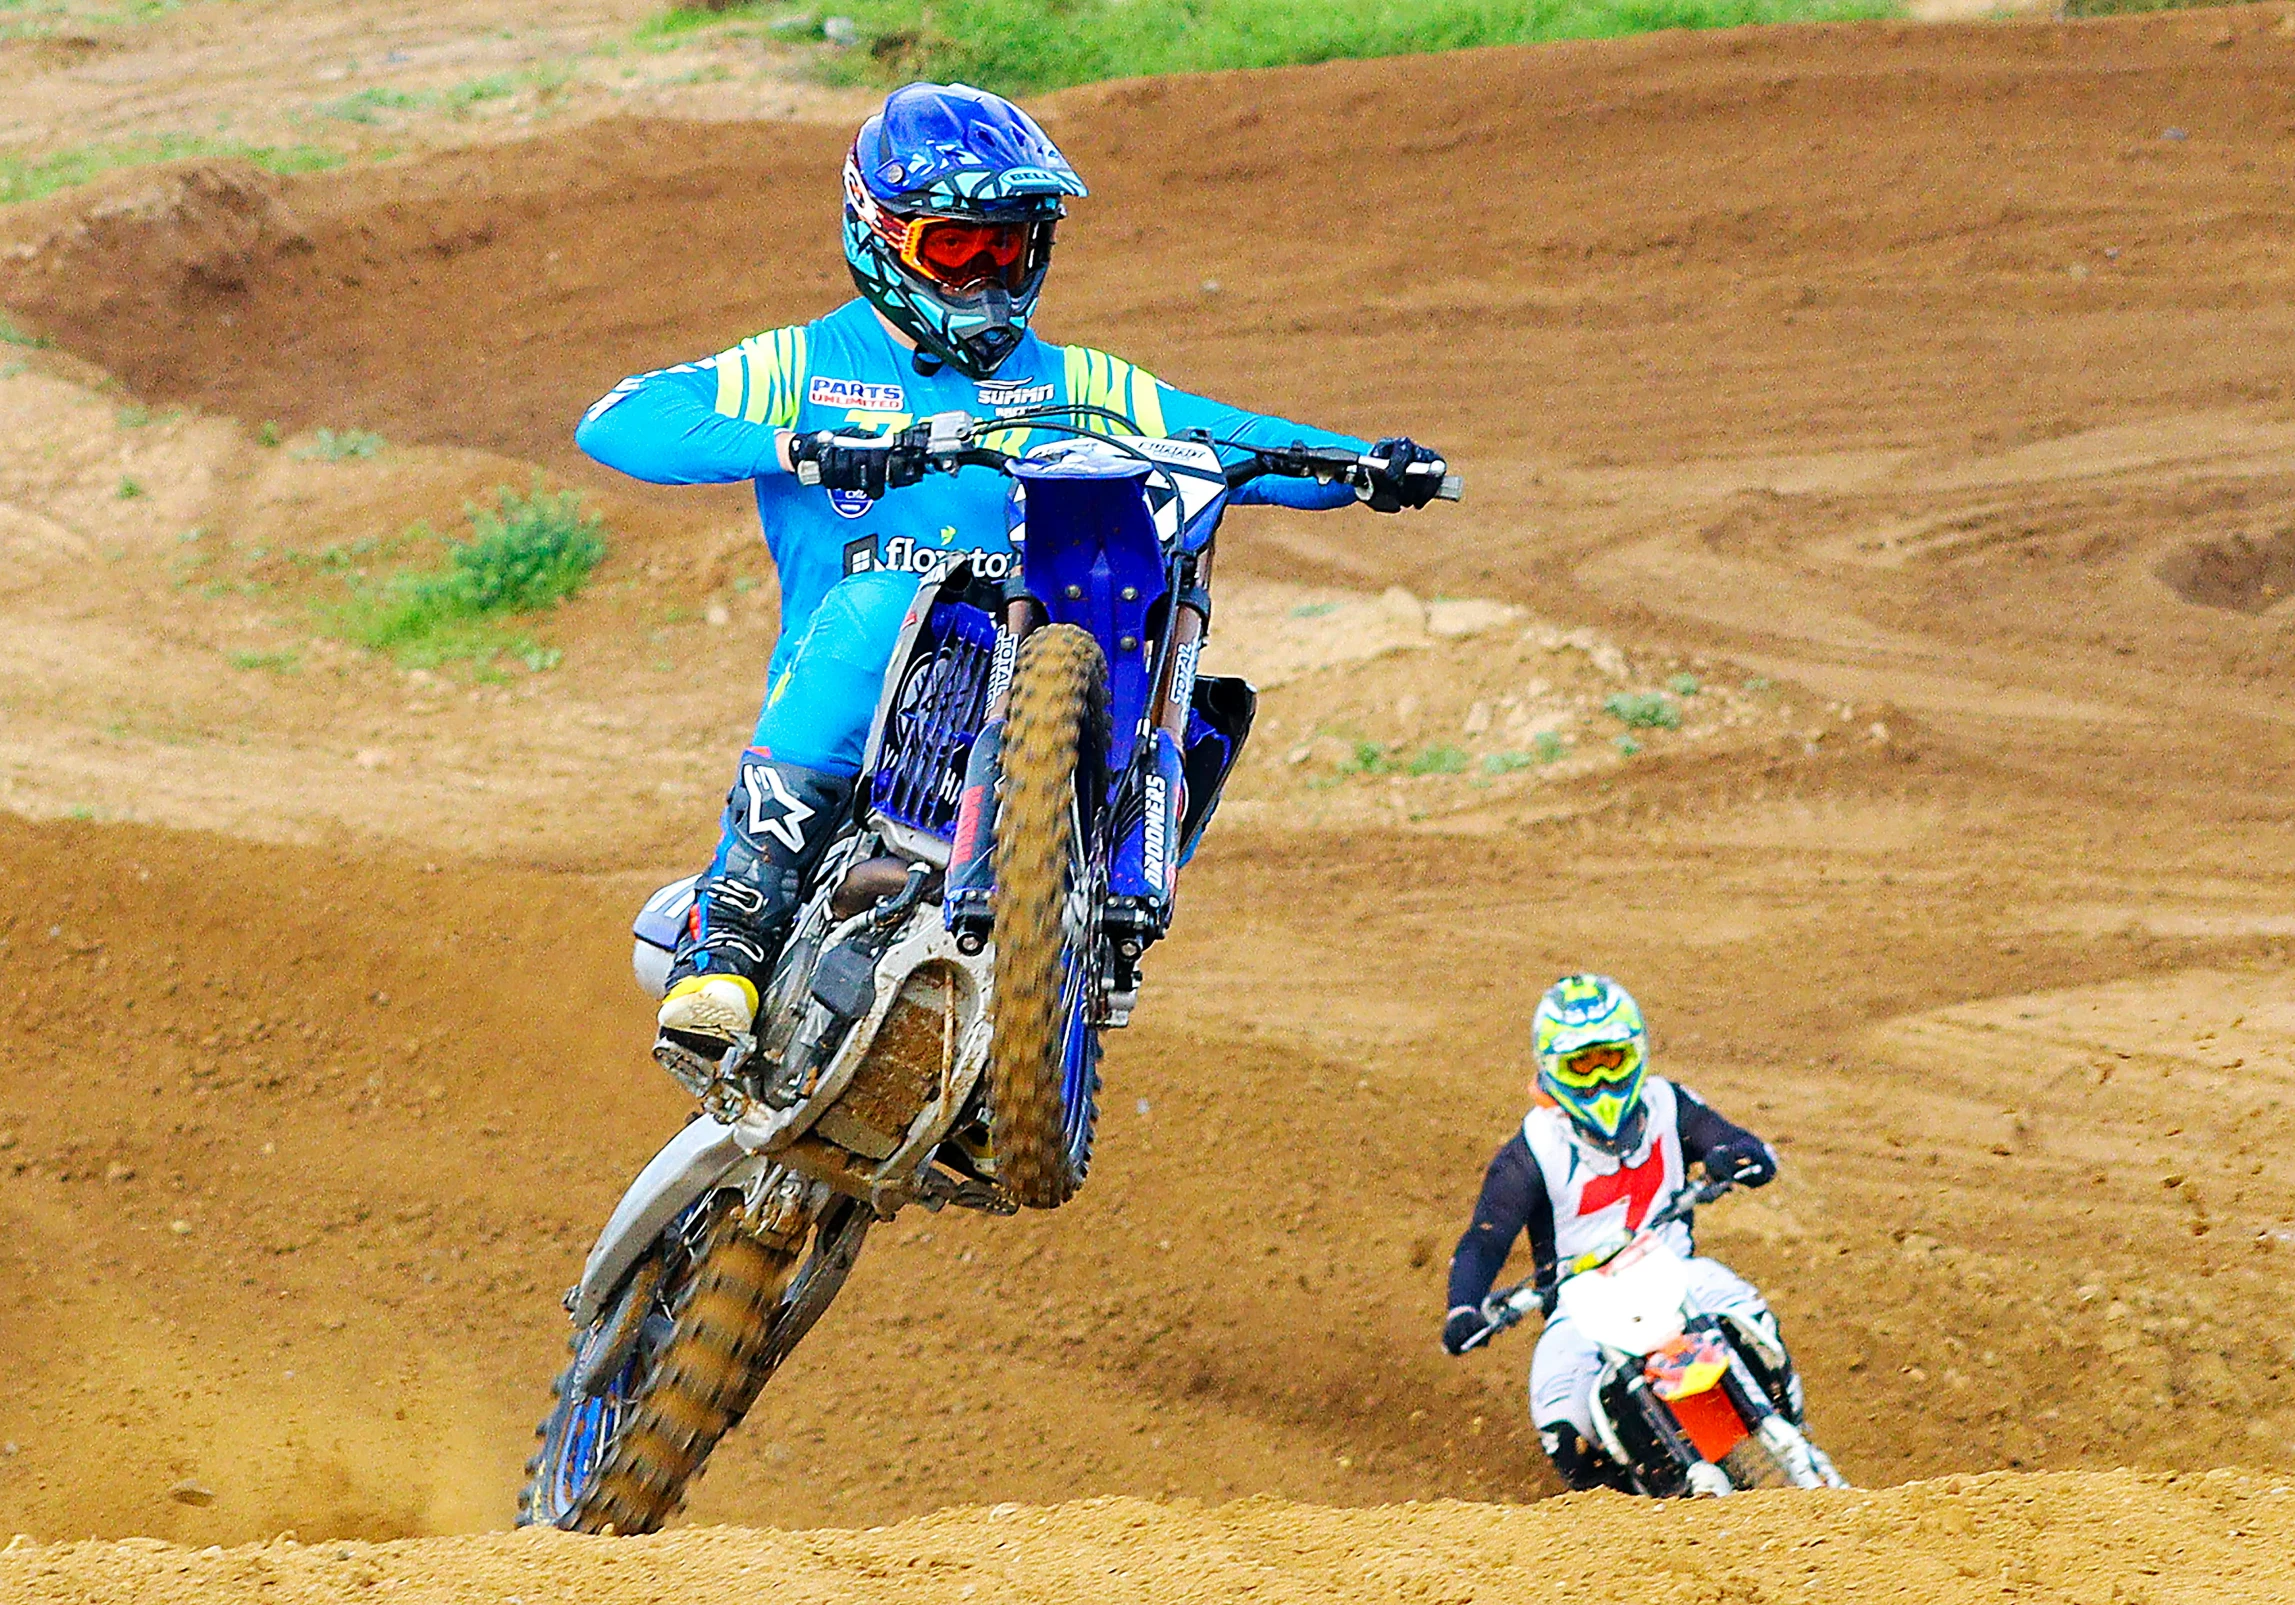 two people on bikes riding the dirt near each other